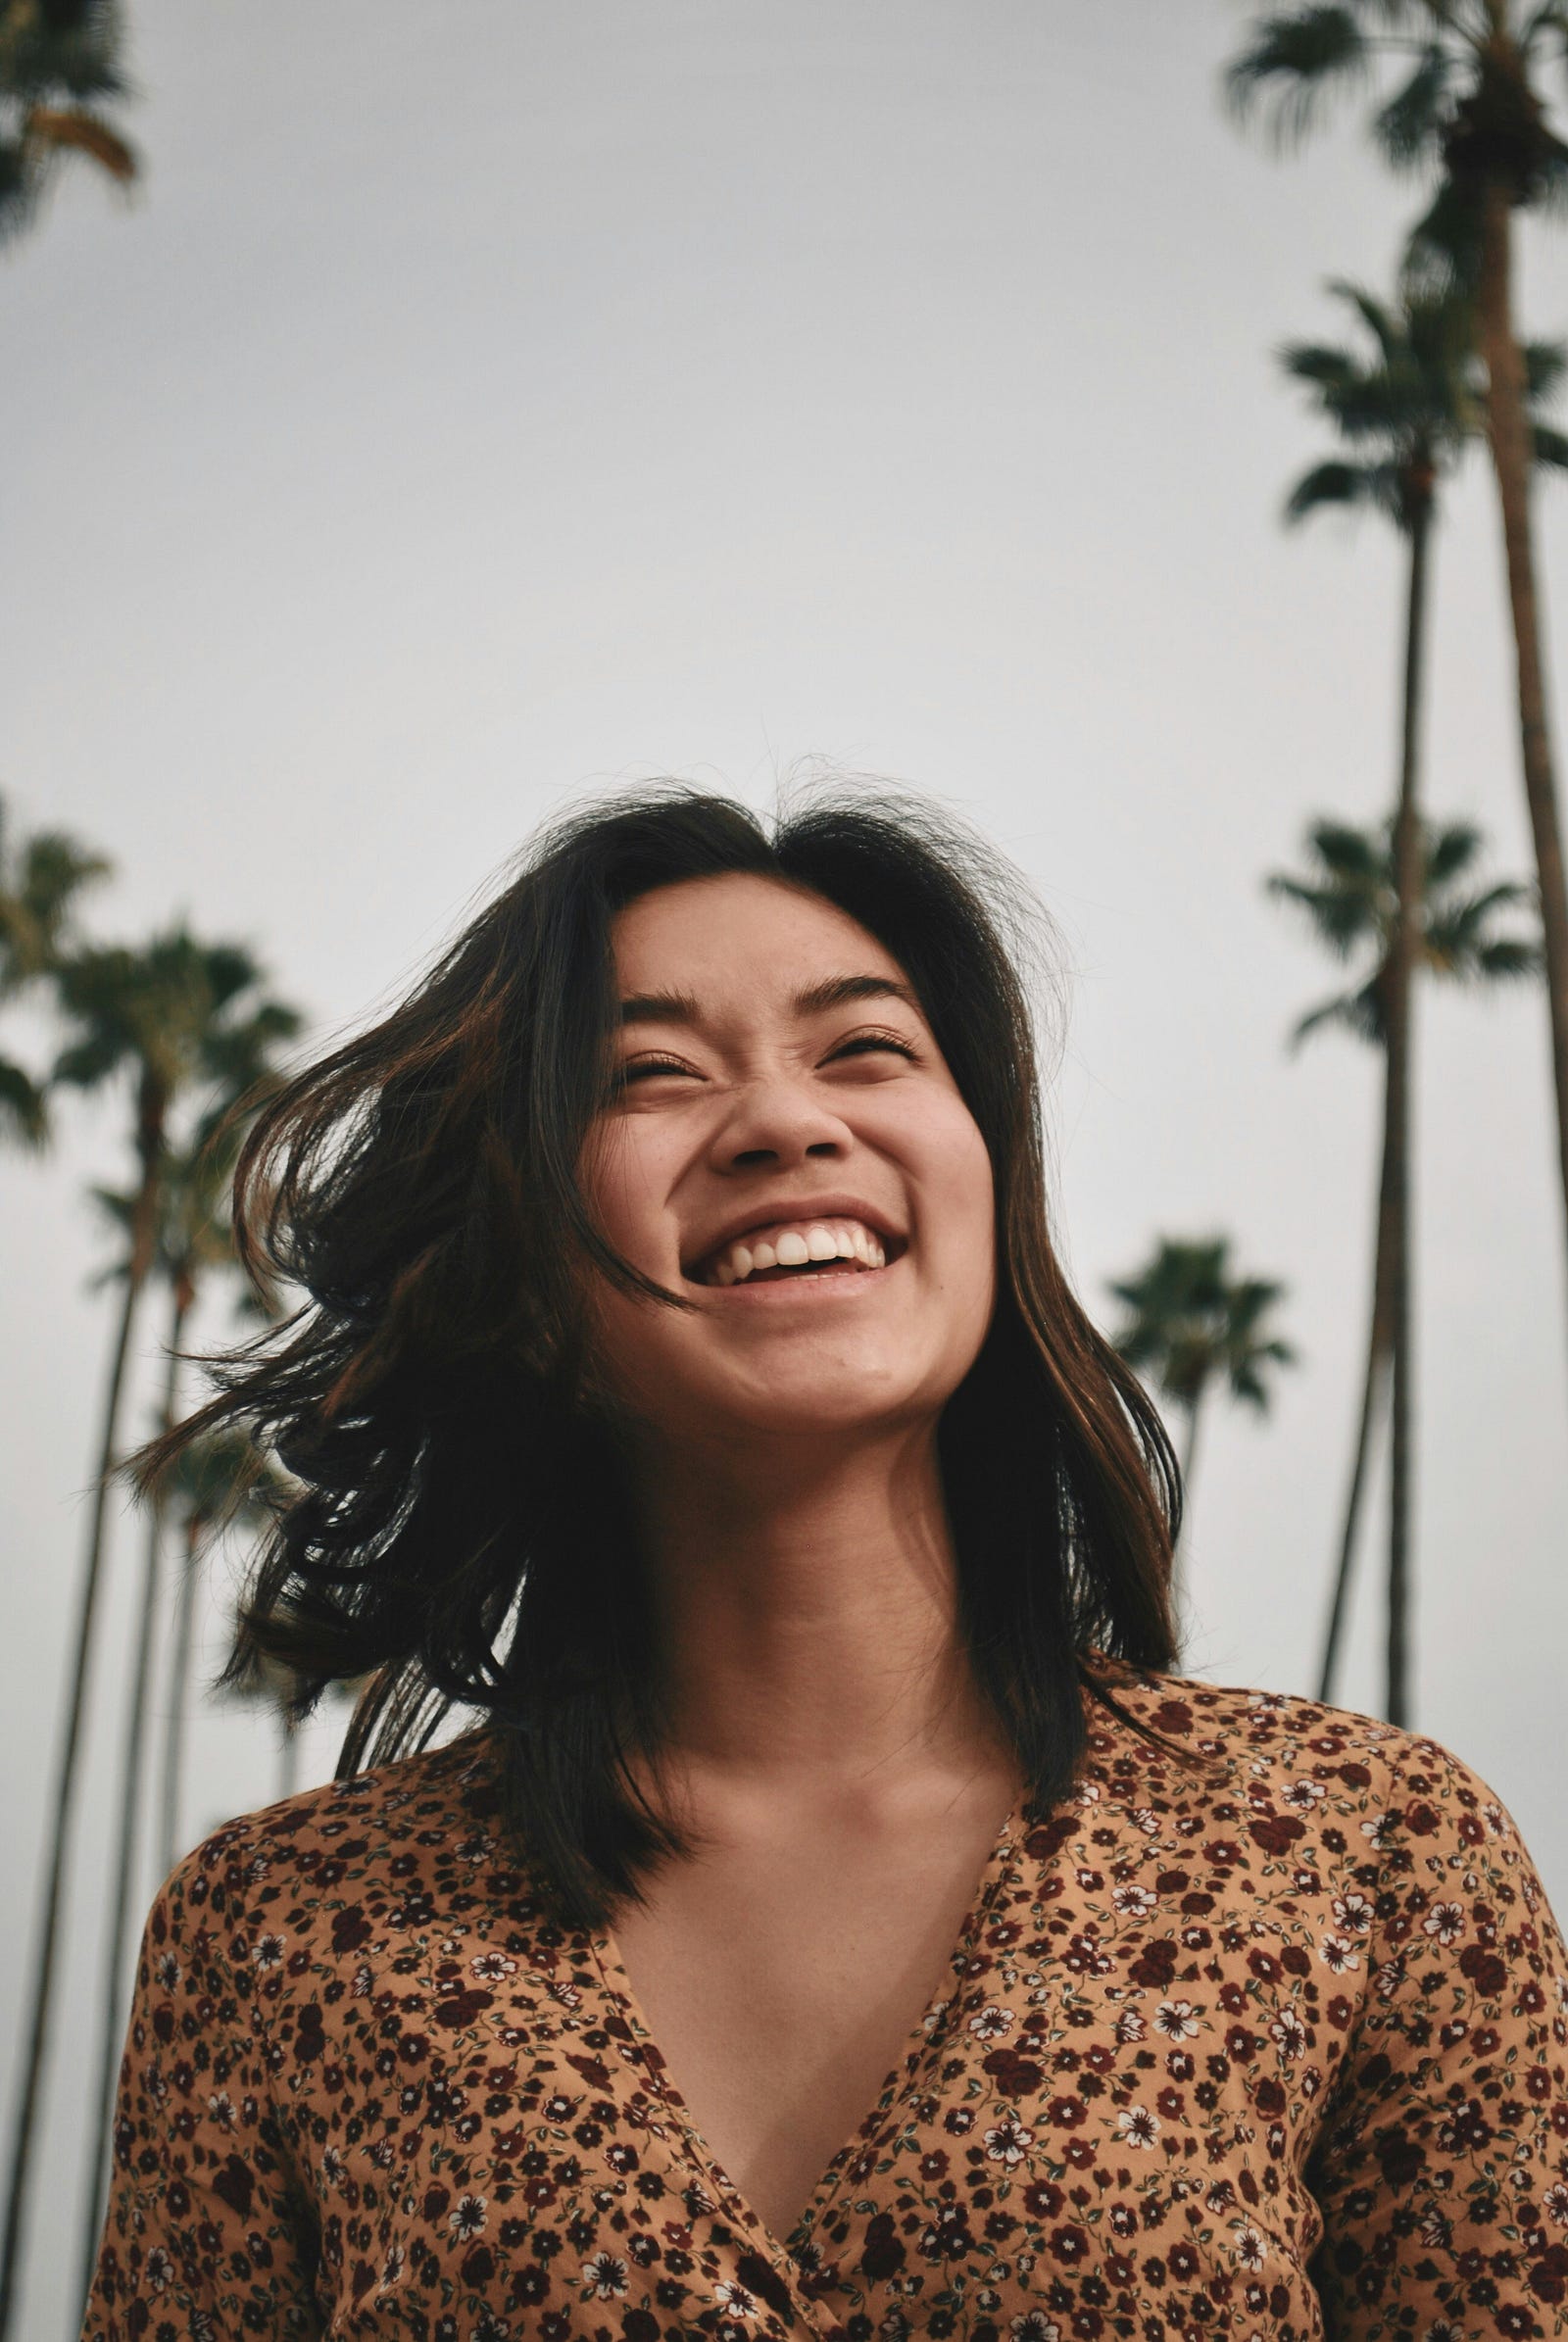 A young Asian woman laughs. There are palm trees on either side of her. The U.S. Preventive Services Task Force (USPSTF) recommends the following cervix cancer screening: Women 21 to 65: Screen with cytology (Pap smear) every three years. Women 30 to 65: Screen with cytology (Pap smear) every three years or co-testing (cytology/HPV testing) every five years.